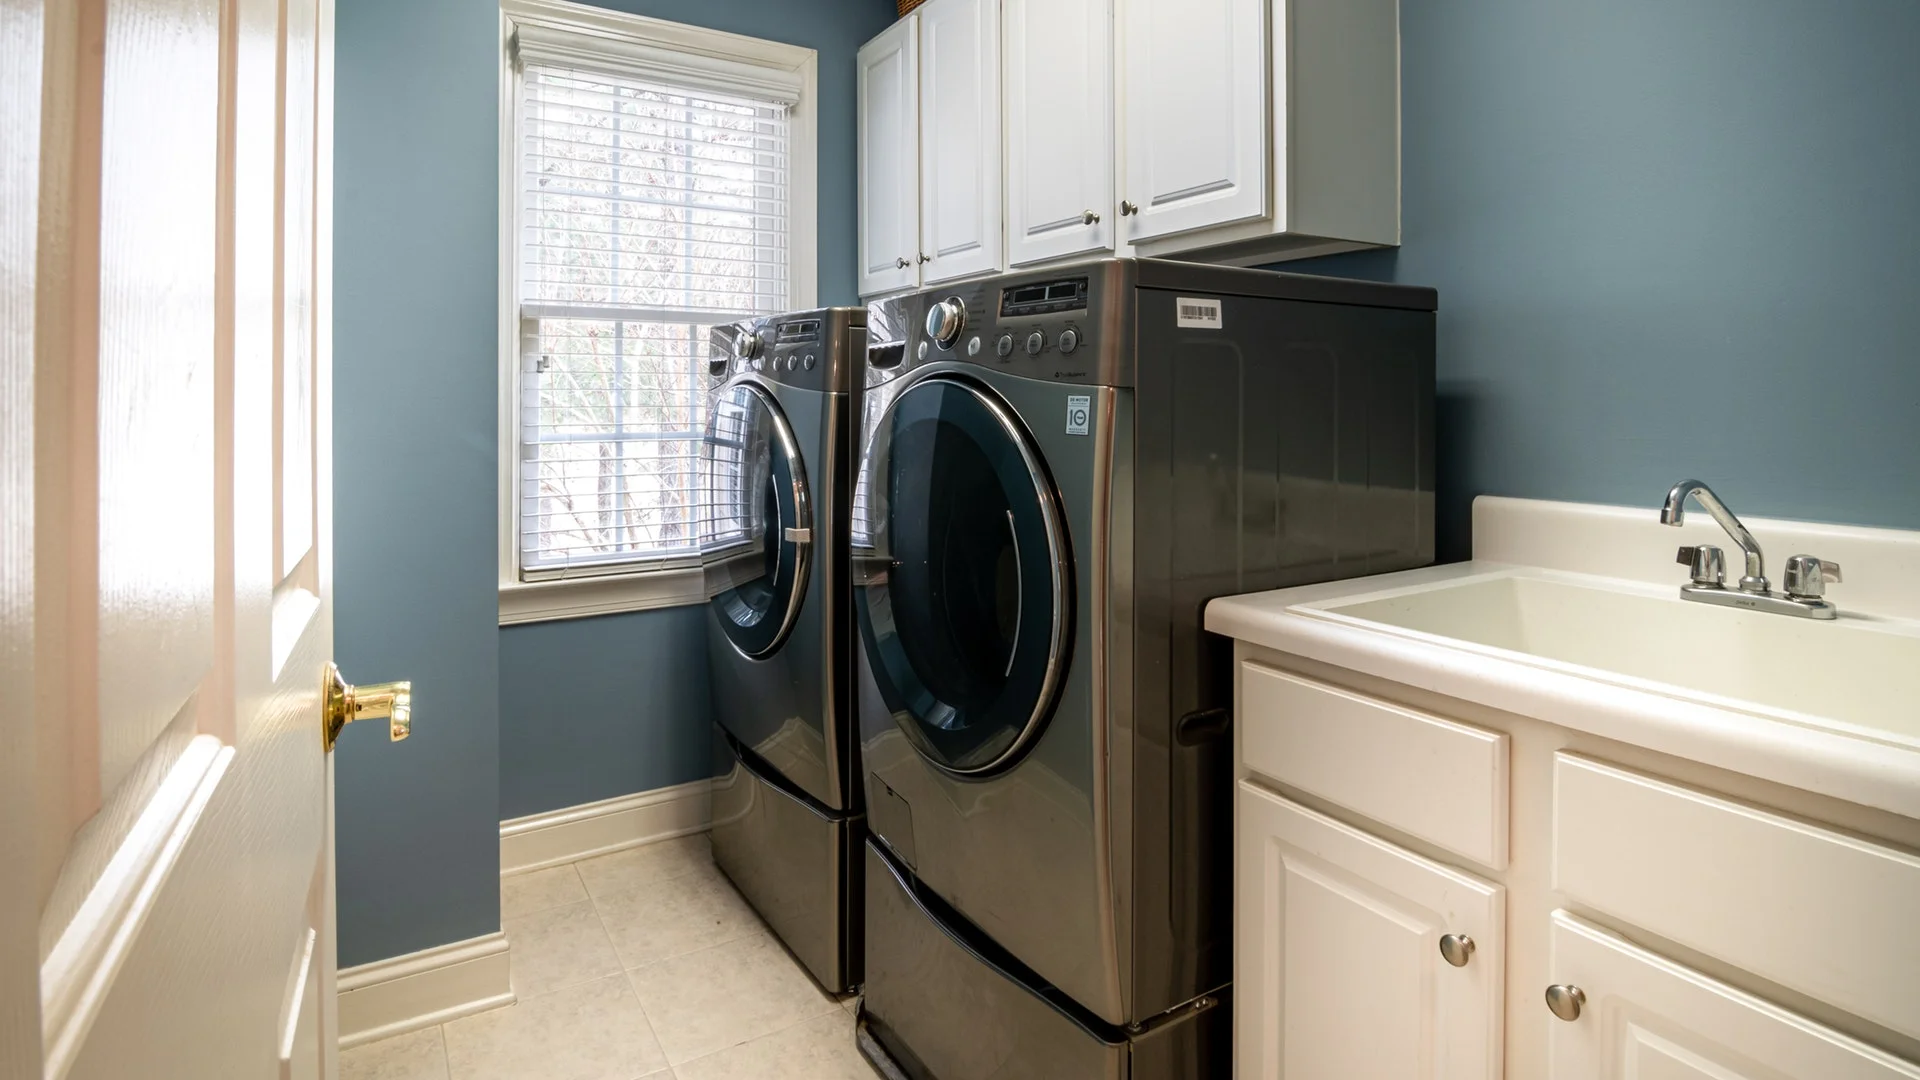 How to Diagnose and Fix a Noisy Dryer